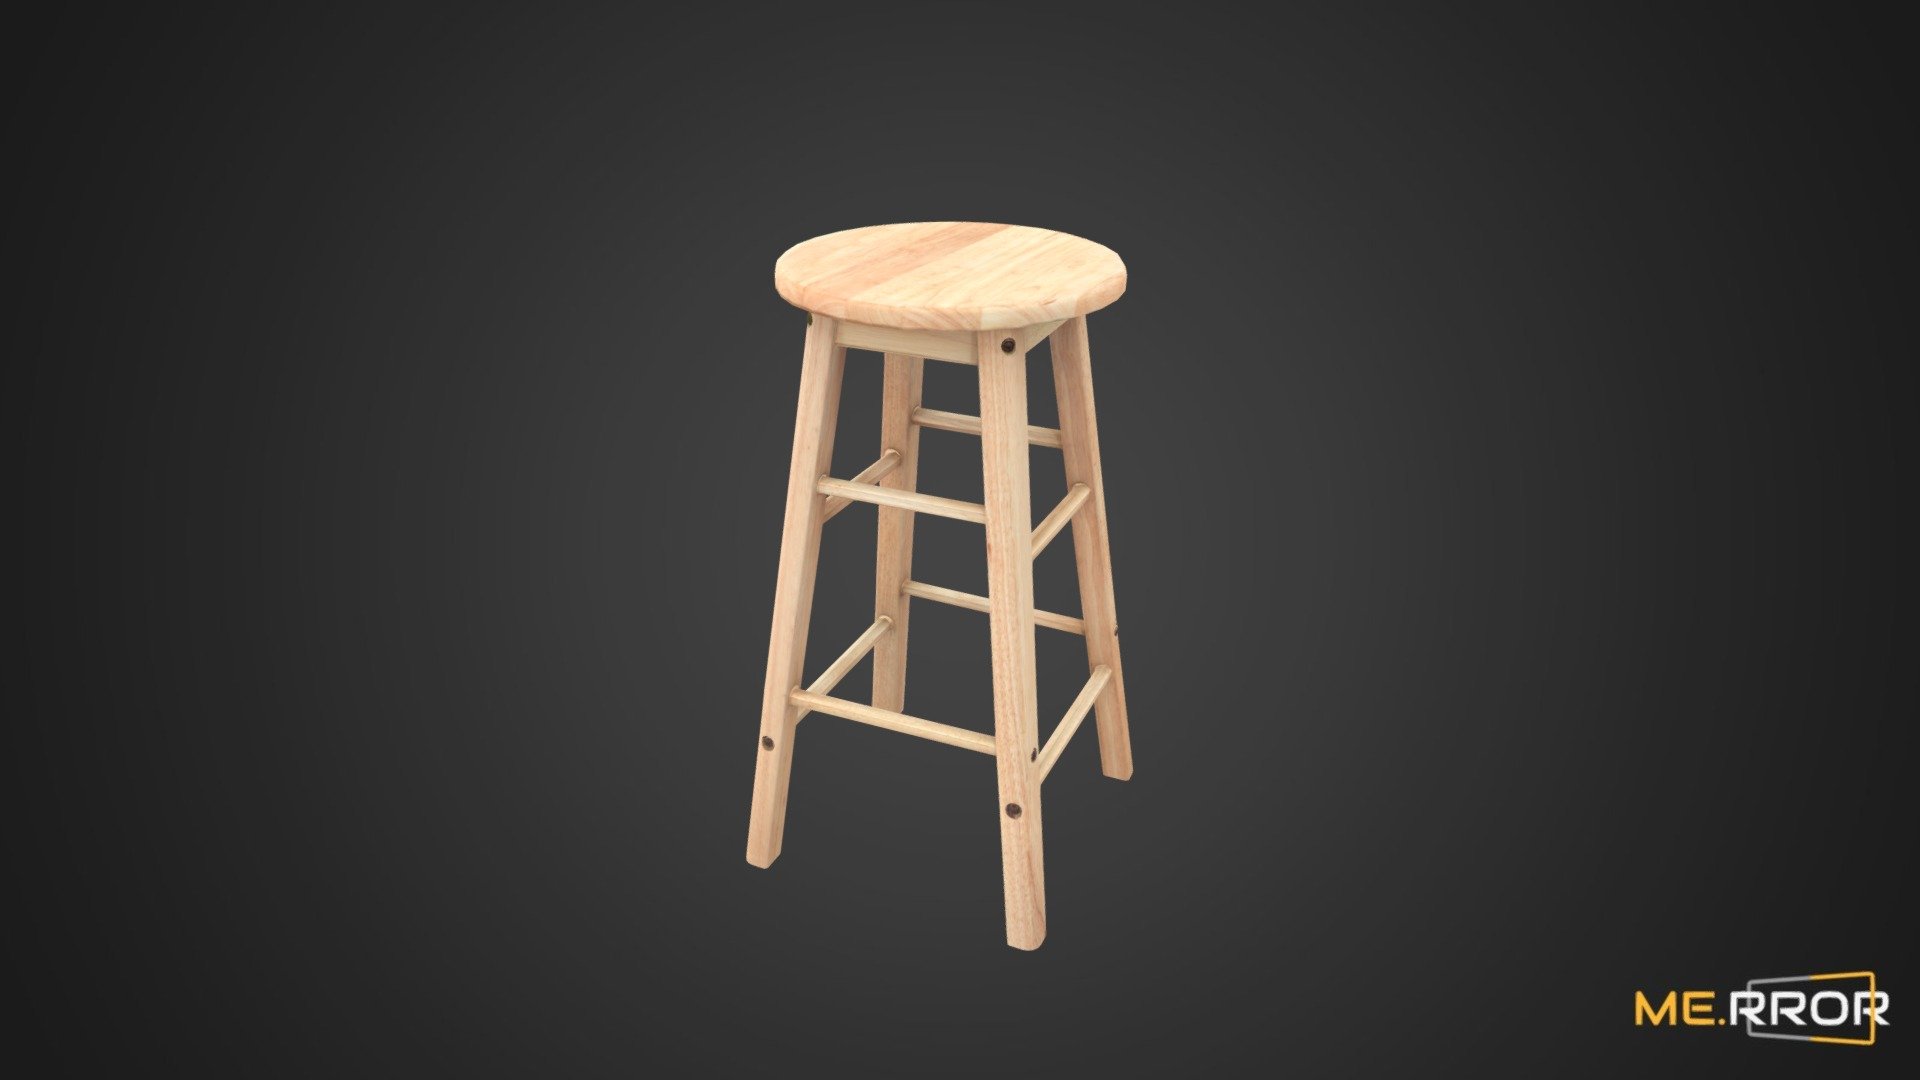 MERROR is a 3D Content PLATFORM which introduces various Asian assets to the 3D world


3DScanning #Photogrametry #ME.RROR - [Game-Ready] High Wood Stool - Buy Royalty Free 3D model by ME.RROR Studio (@merror) 3d model